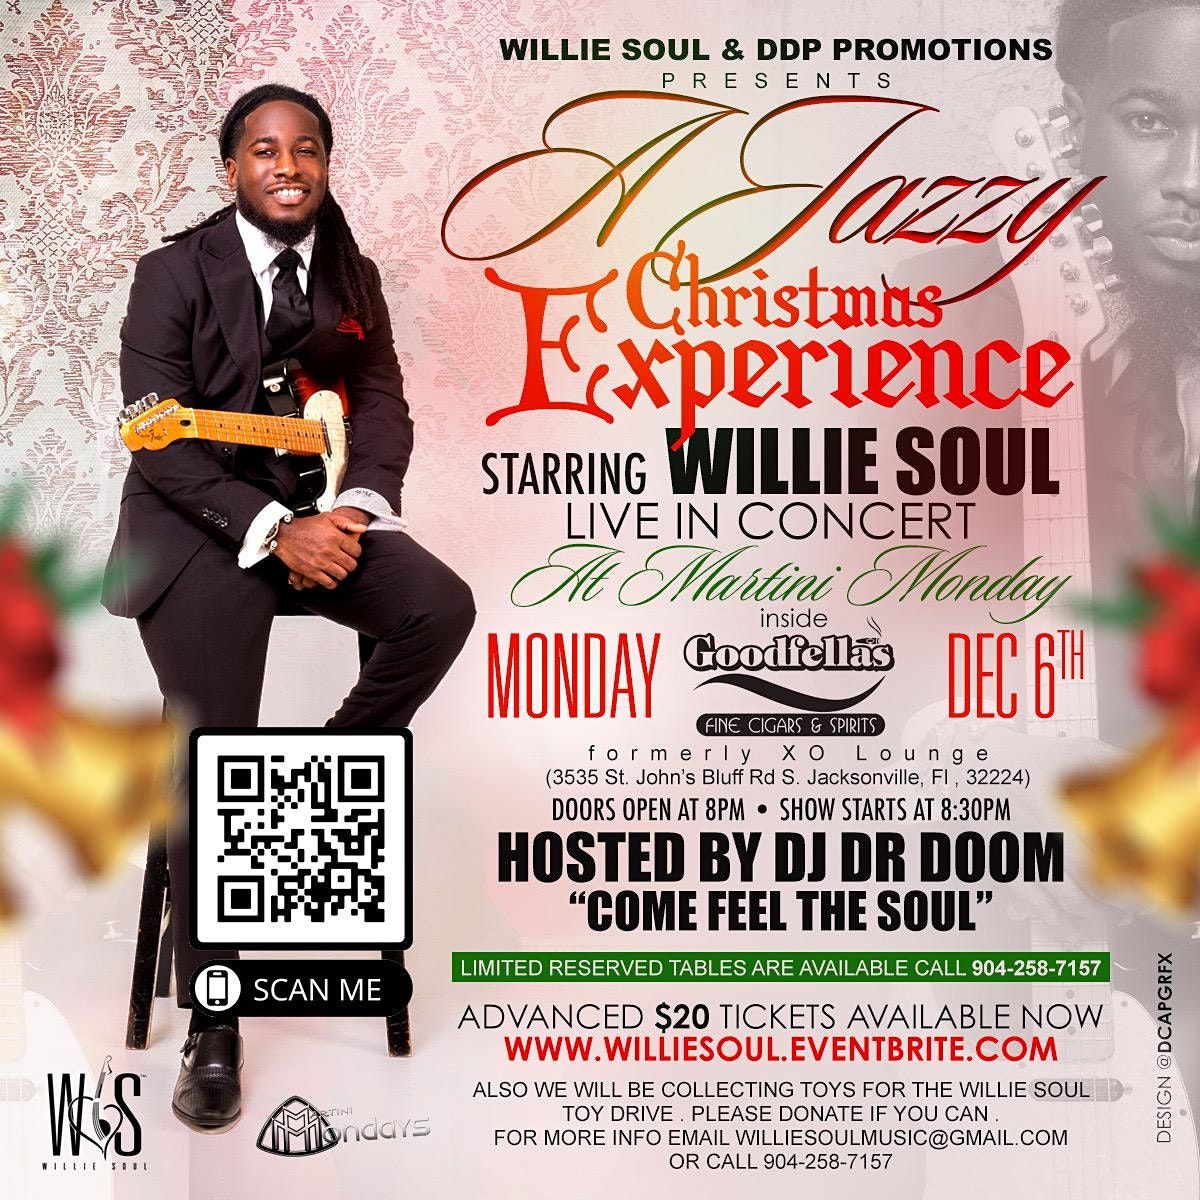 A Jazzy Christmas Experience  Starring WILLIE SOUL Live in Concert